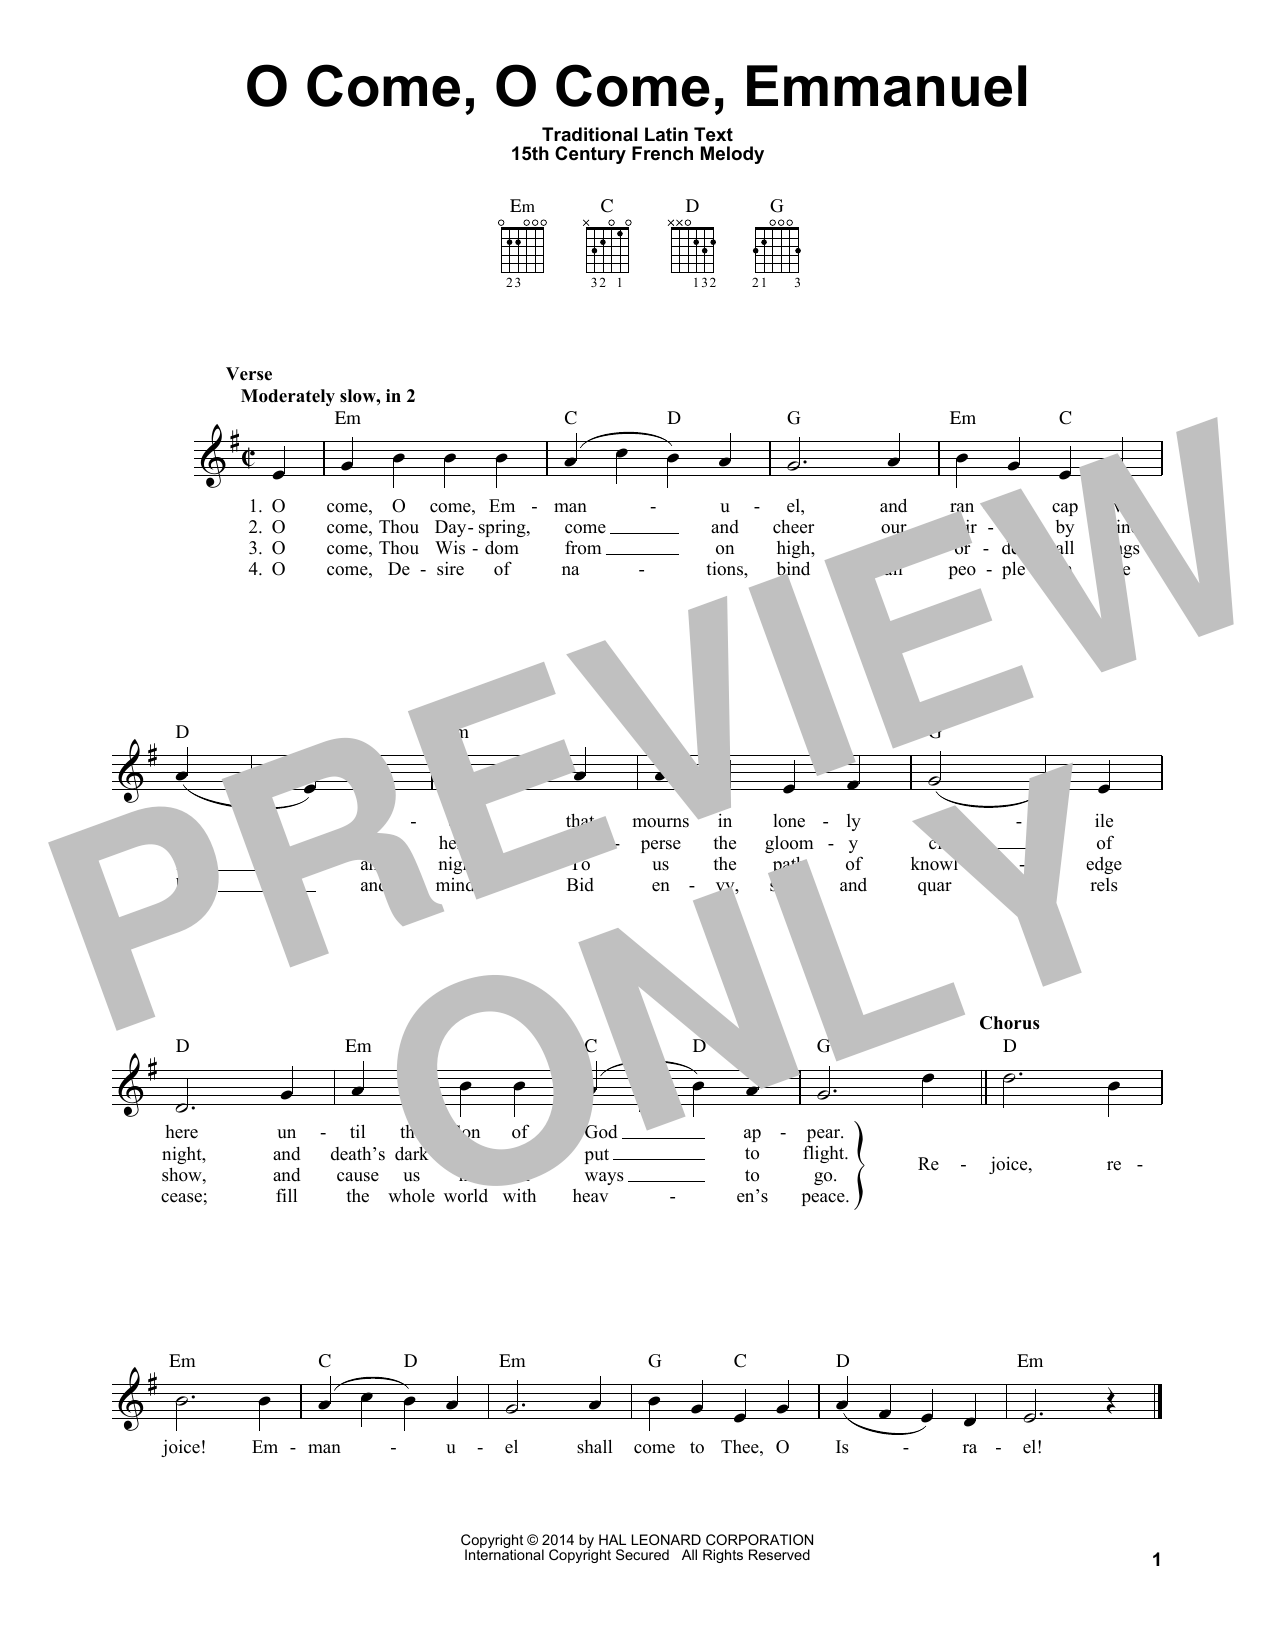 Download 15th Century French Melody O Come, O Come, Emmanuel Sheet Music